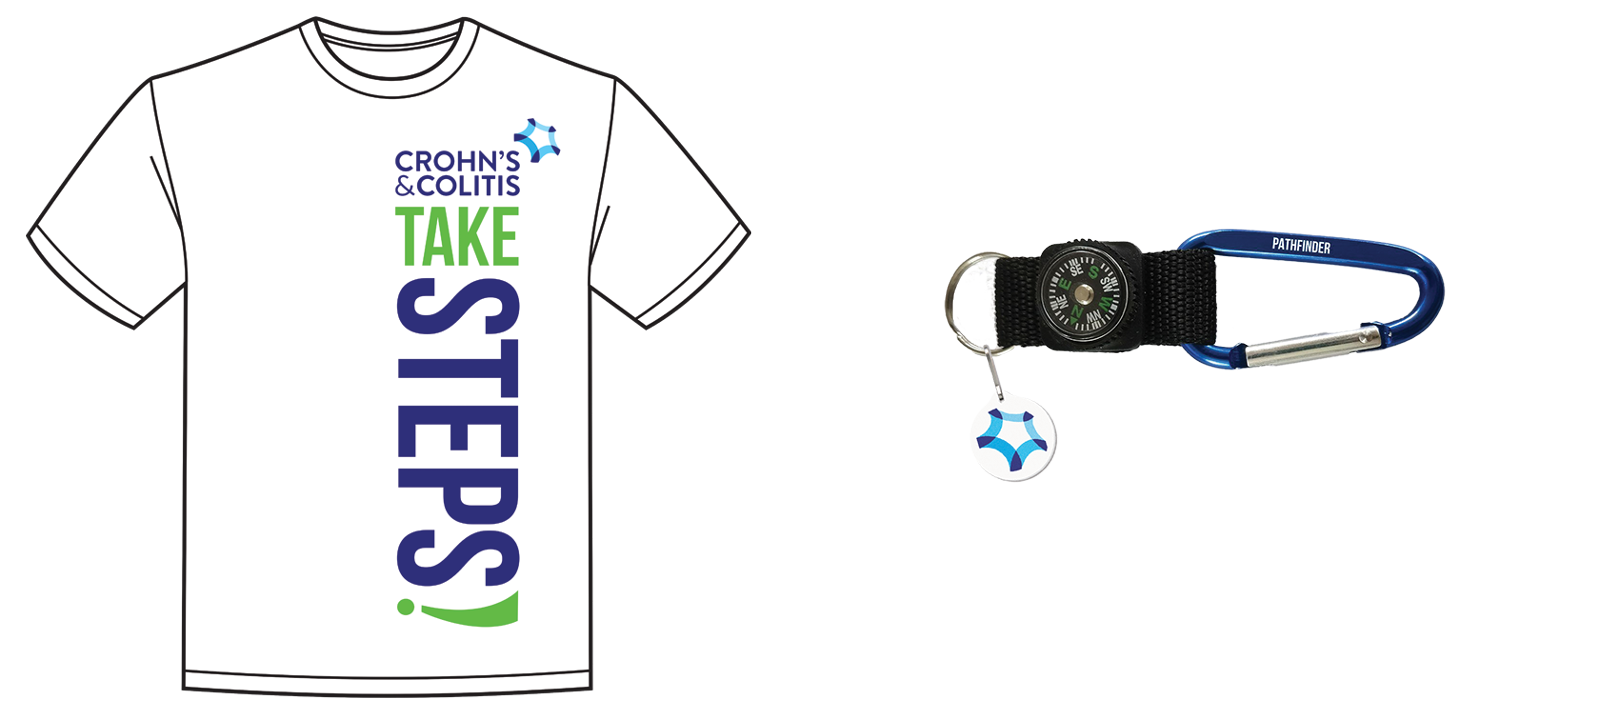 incentive images - t-shirt and compass